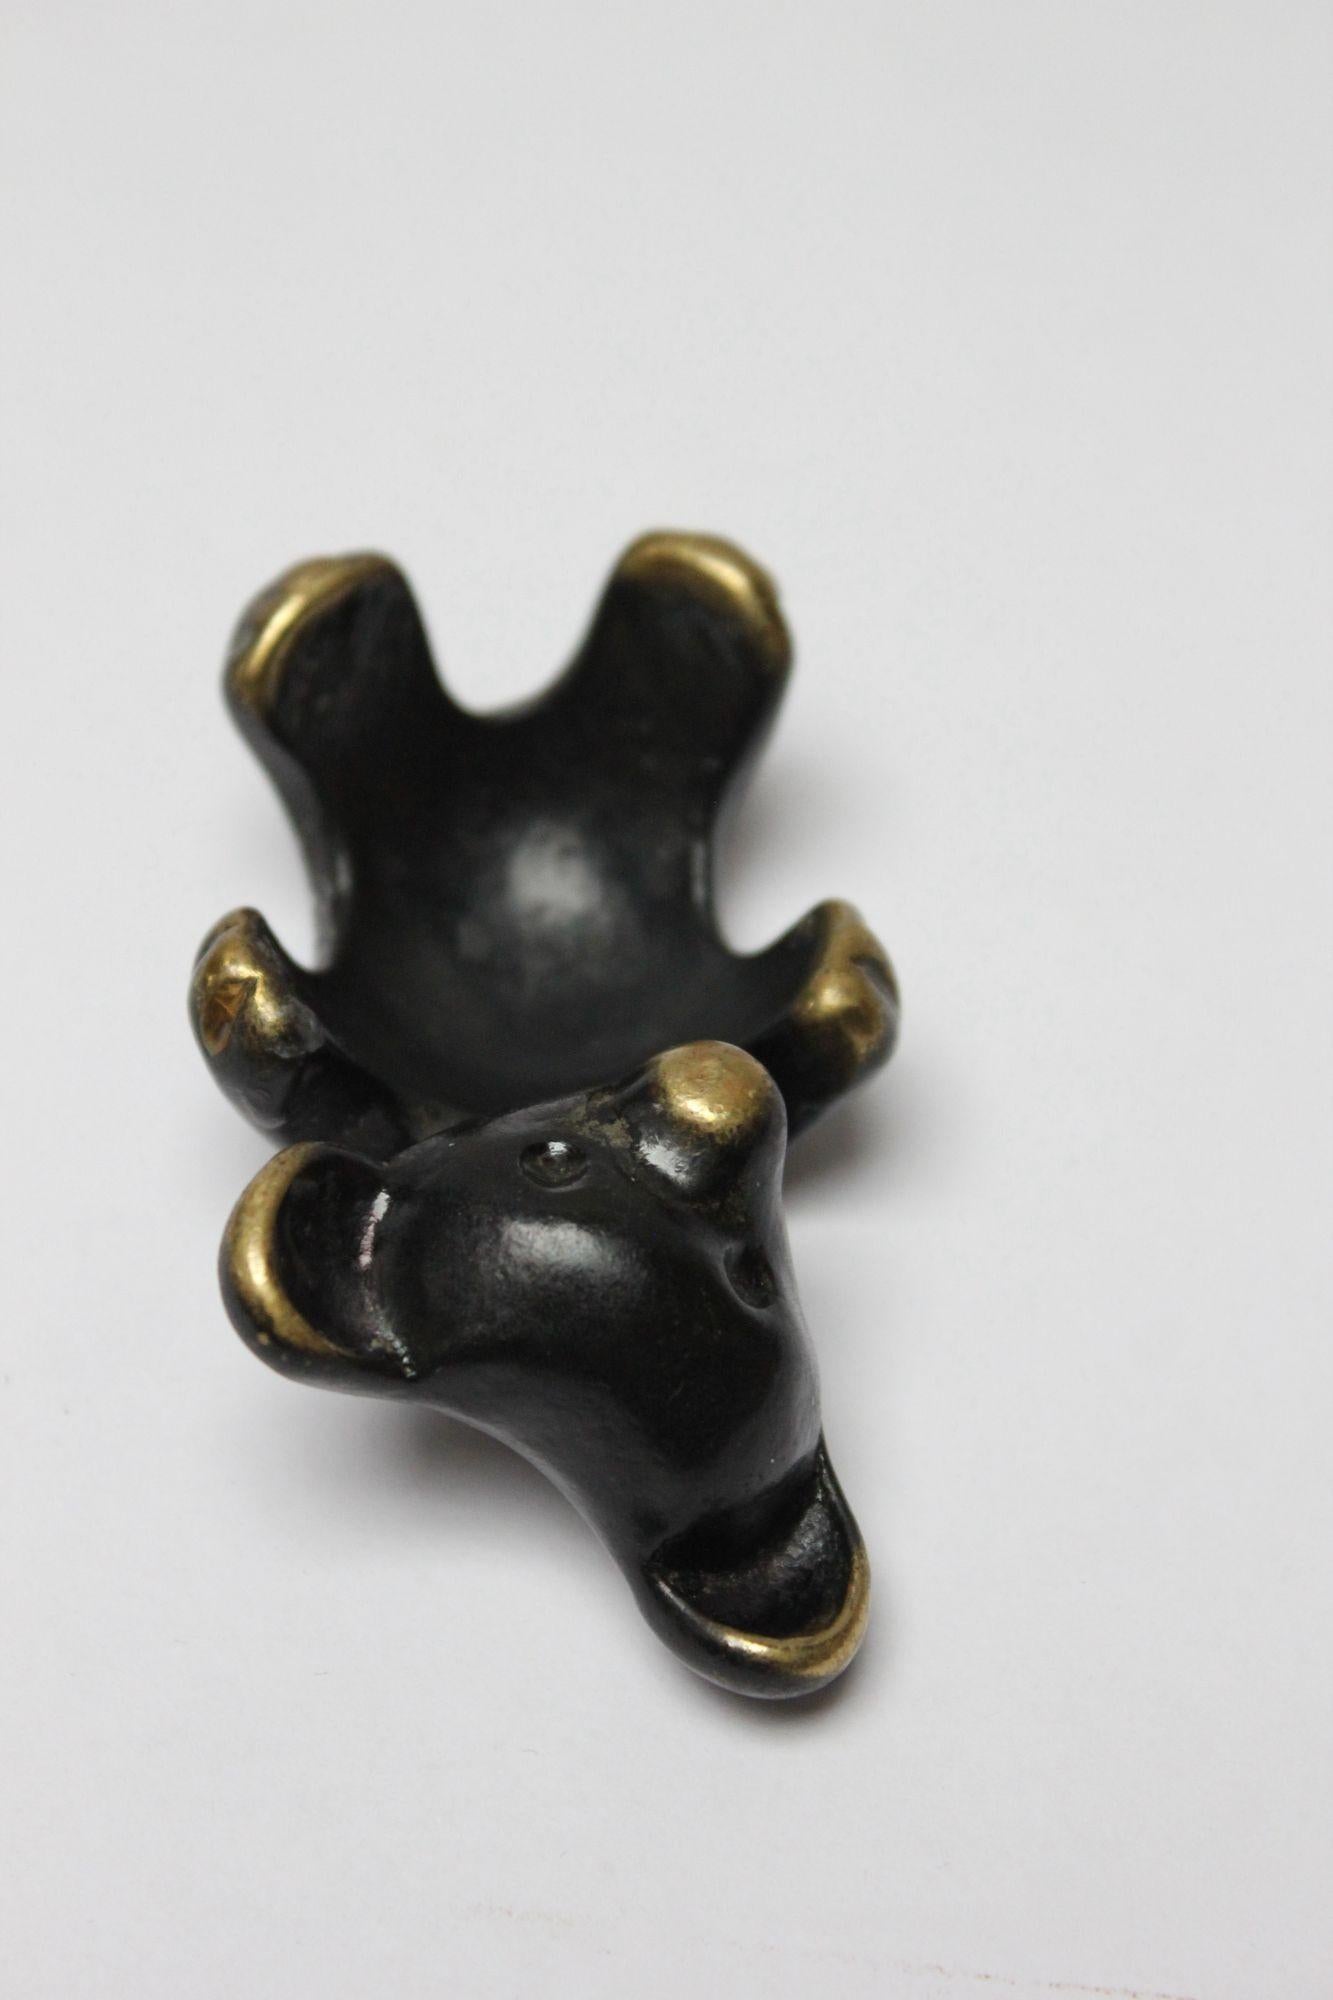 Blackened Brass Bear Candleholder/Figurine by Walter Bosse and Herta Baller In Good Condition For Sale In Brooklyn, NY